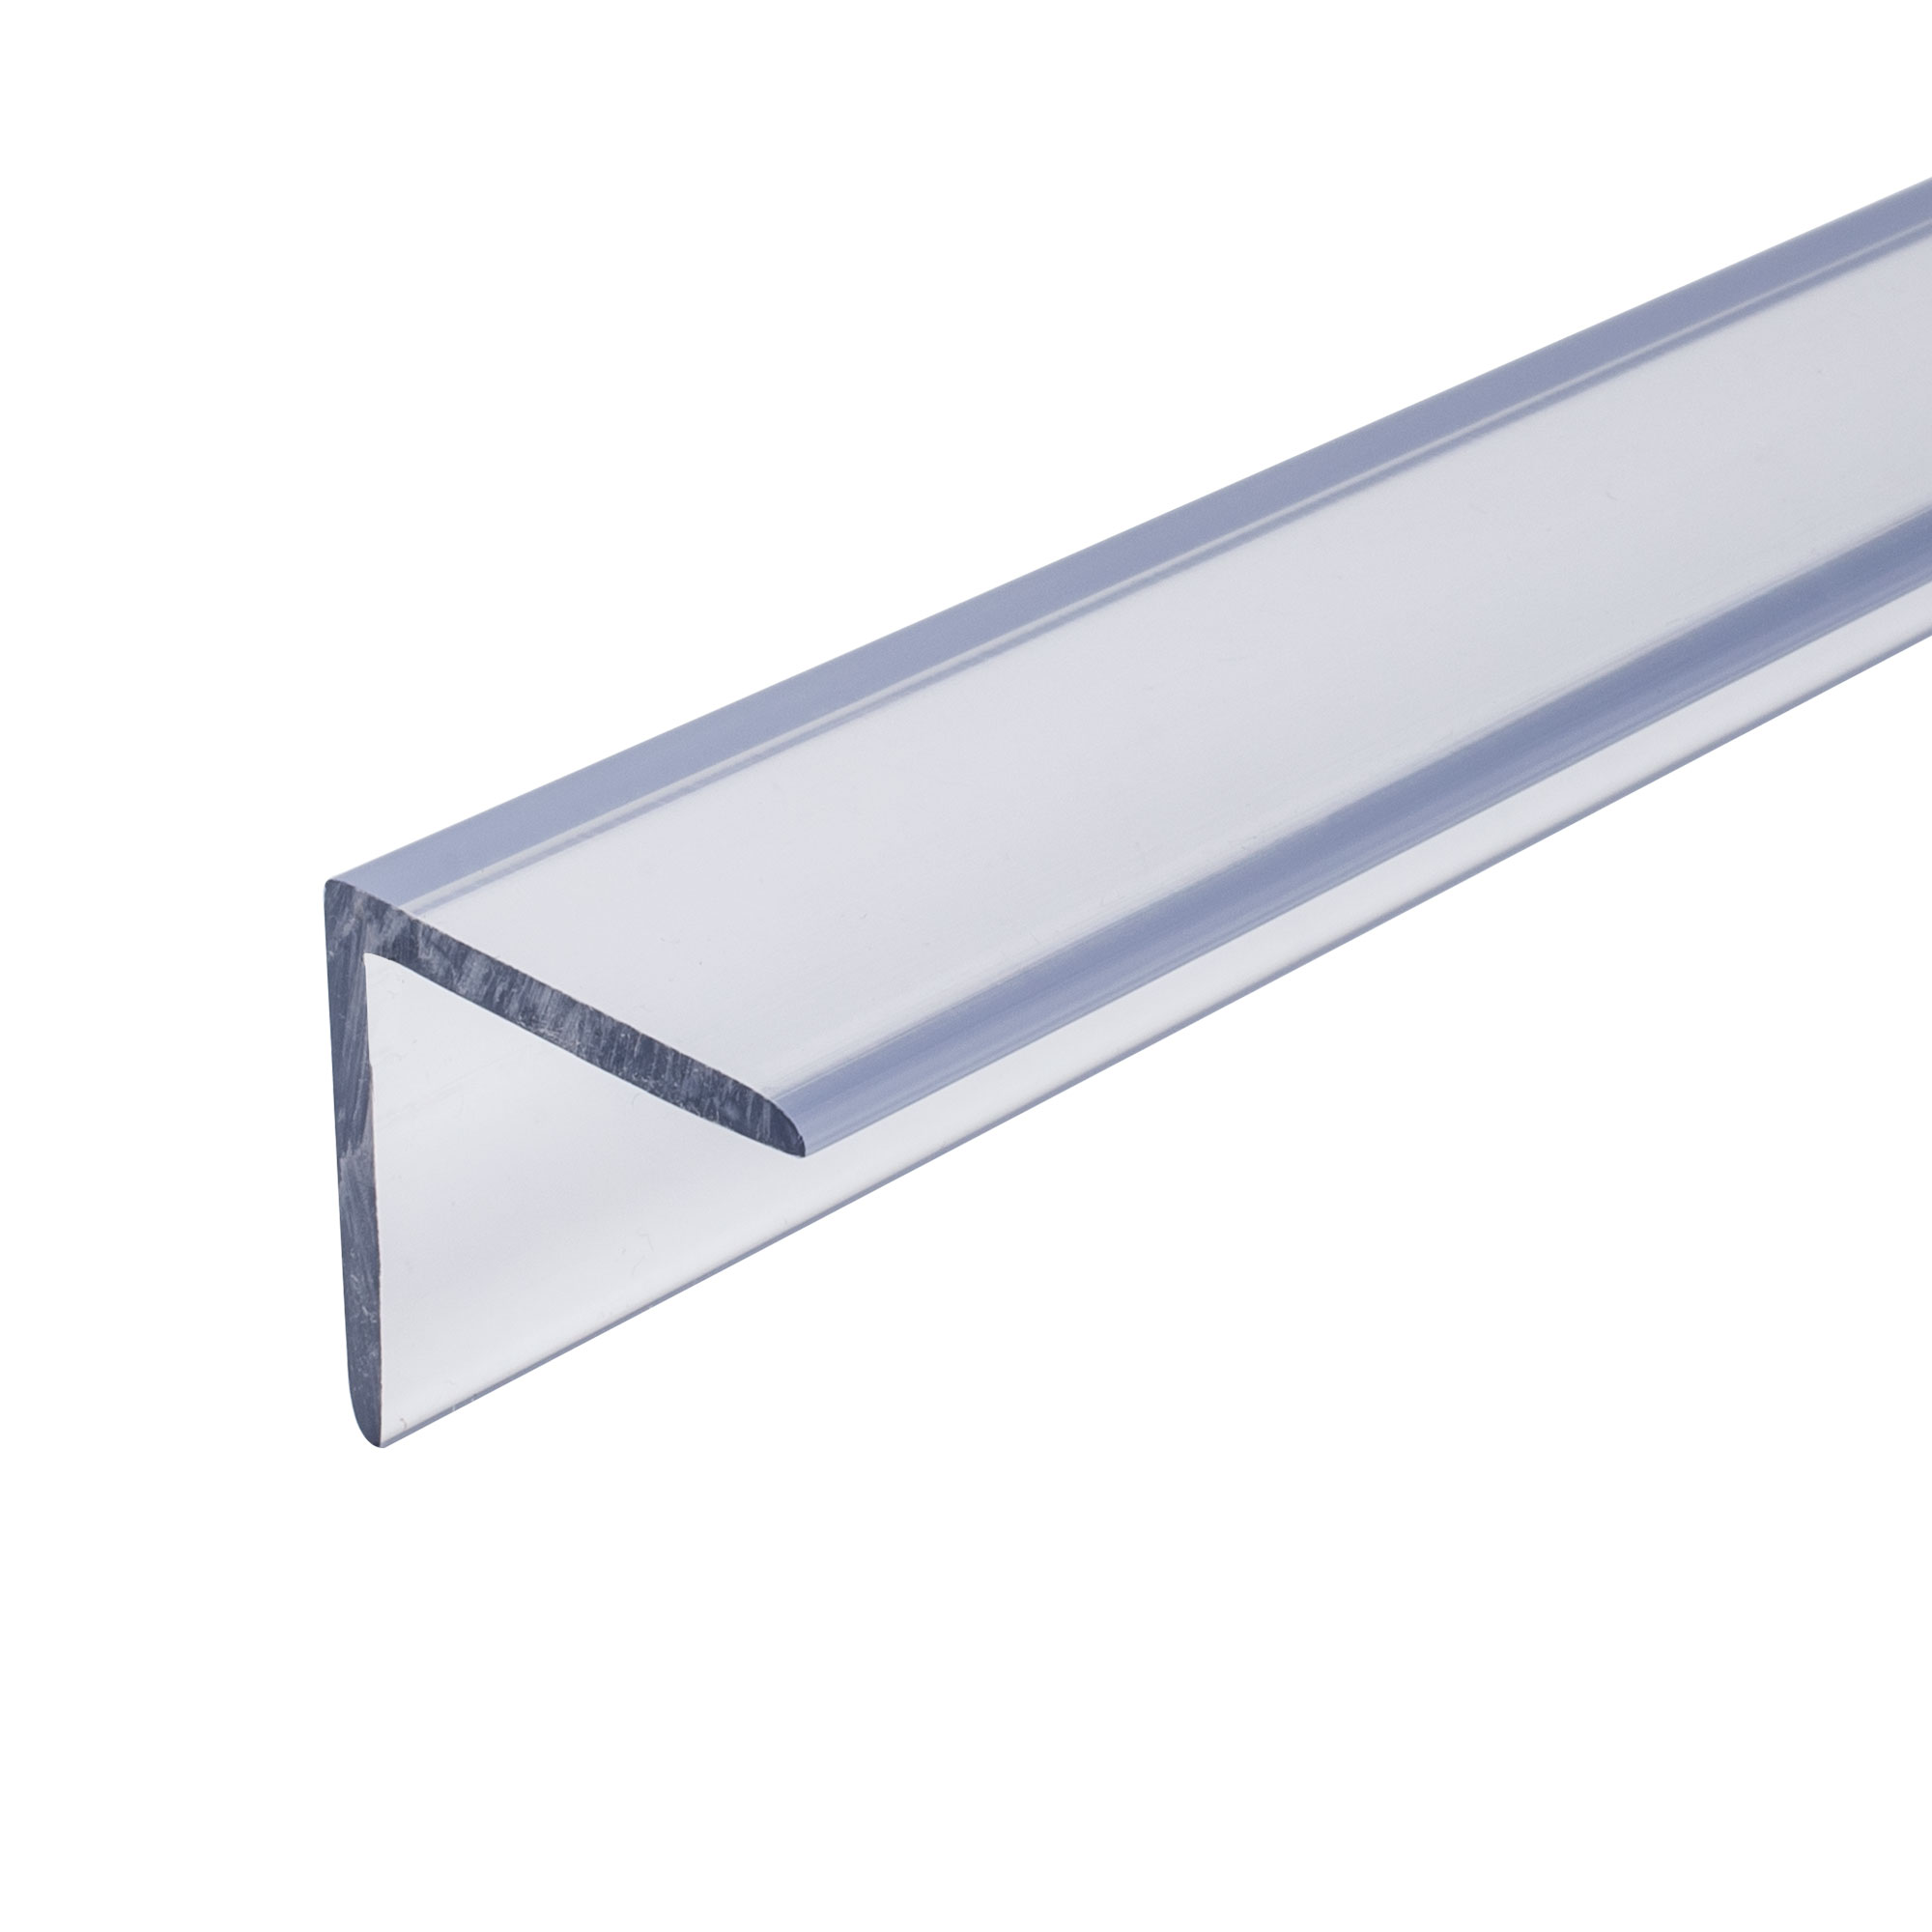 Outwater Plastics 1750-CL Butyrate 1-1/4 Inch X 1-1/4 Inch X 7/64 (.109) Inch Thick Clear Plastic Even Leg Angle Moulding 36 Inch Lengths (Pack of 4) - image 3 of 5